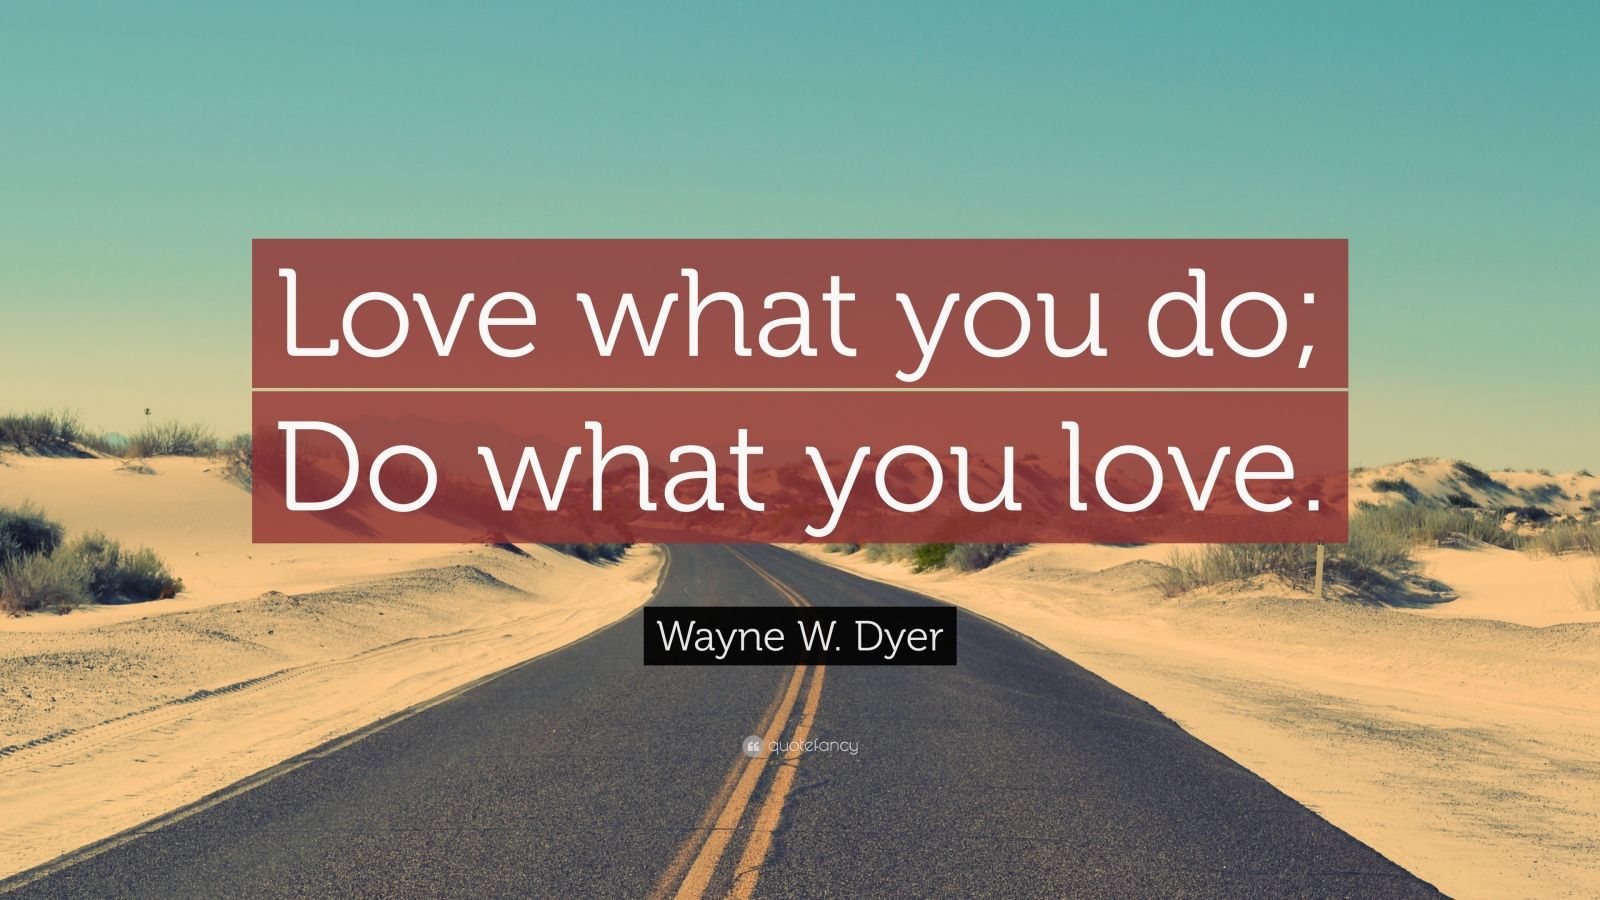 14867 Wayne W Dyer Quote Love what you do Do what you love